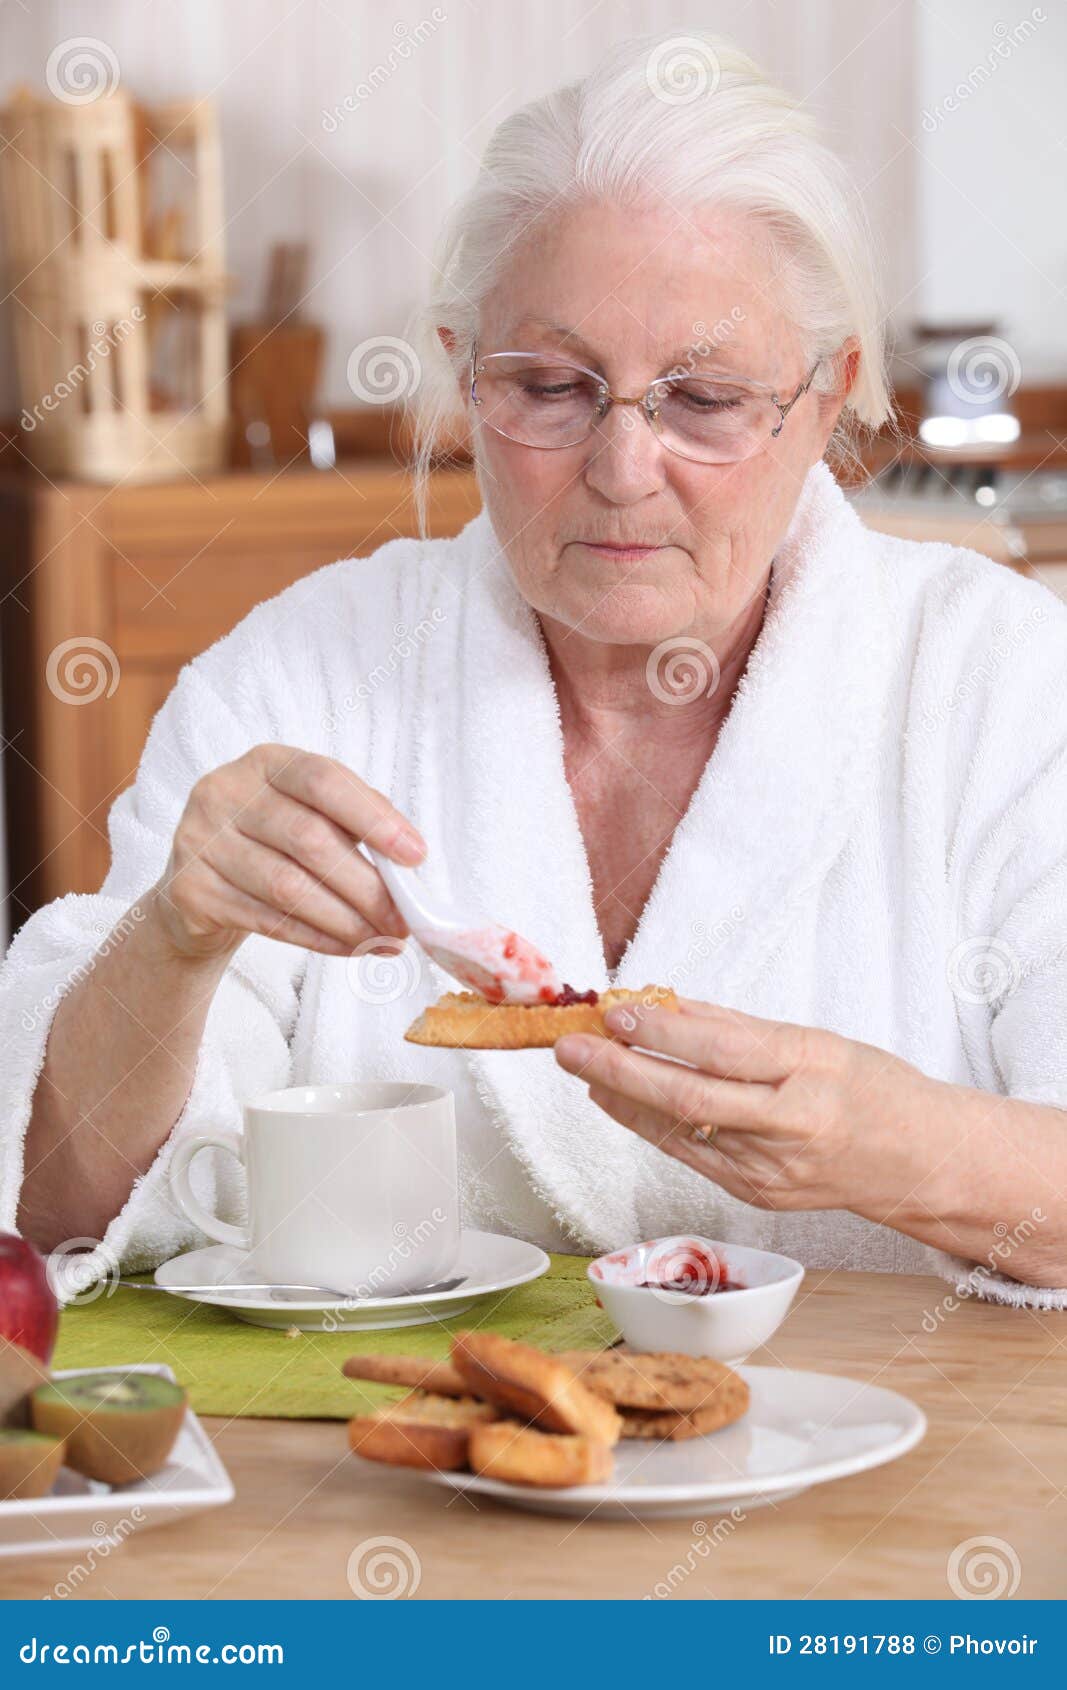 Woman Eating Breakfast Royalty Free Stock Photos - Image: 28191788